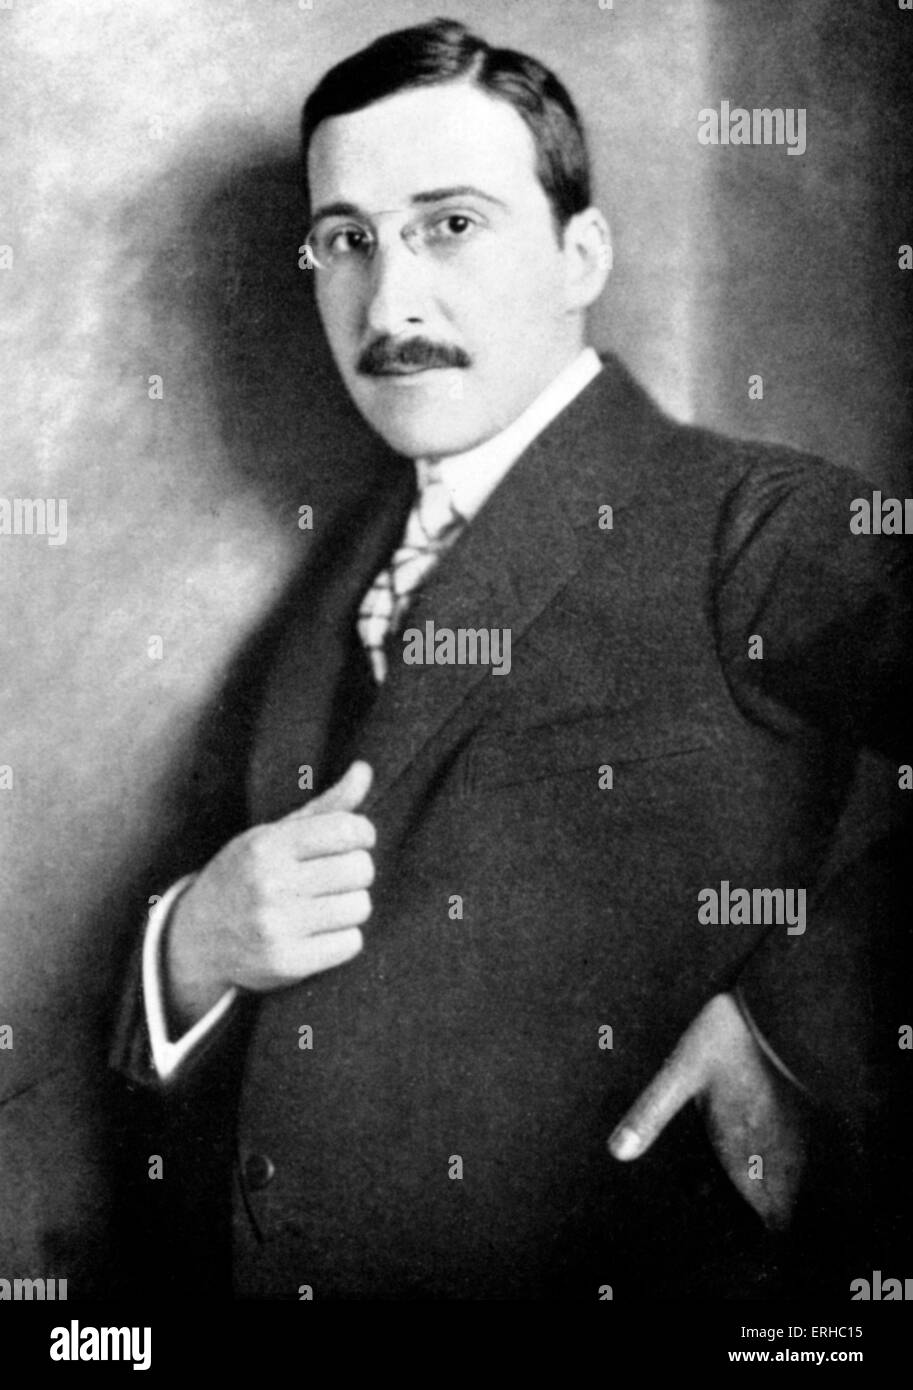 Stefan Zweig as a young man. Austrian writer. Committed suicide with his wife in Brazil. 28 November 1881 - 22 February 1942 Stock Photo